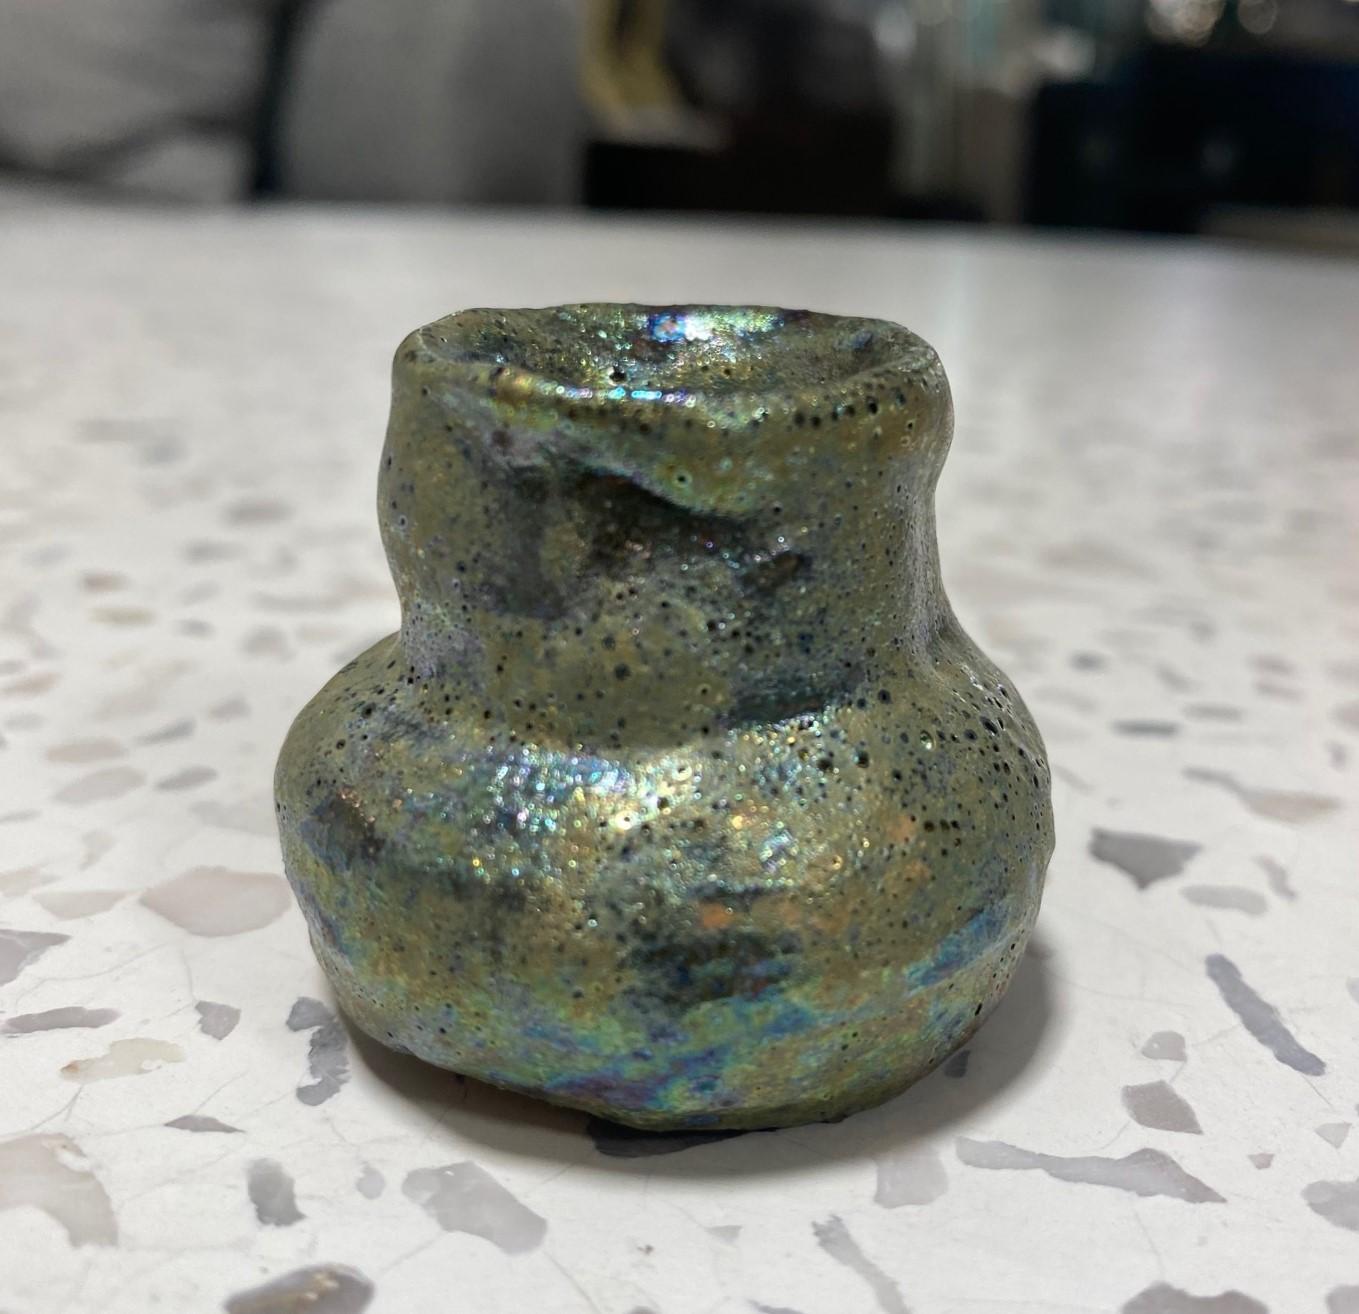 A wonderful, absolute gem of a piece by famed American California studio ceramist Beatrice Wood featuring her highly desired gorgeous iridescent luster volcanic (crater) lava glaze.  This miniature (mini) vase/vessel/pot may very possibly be the